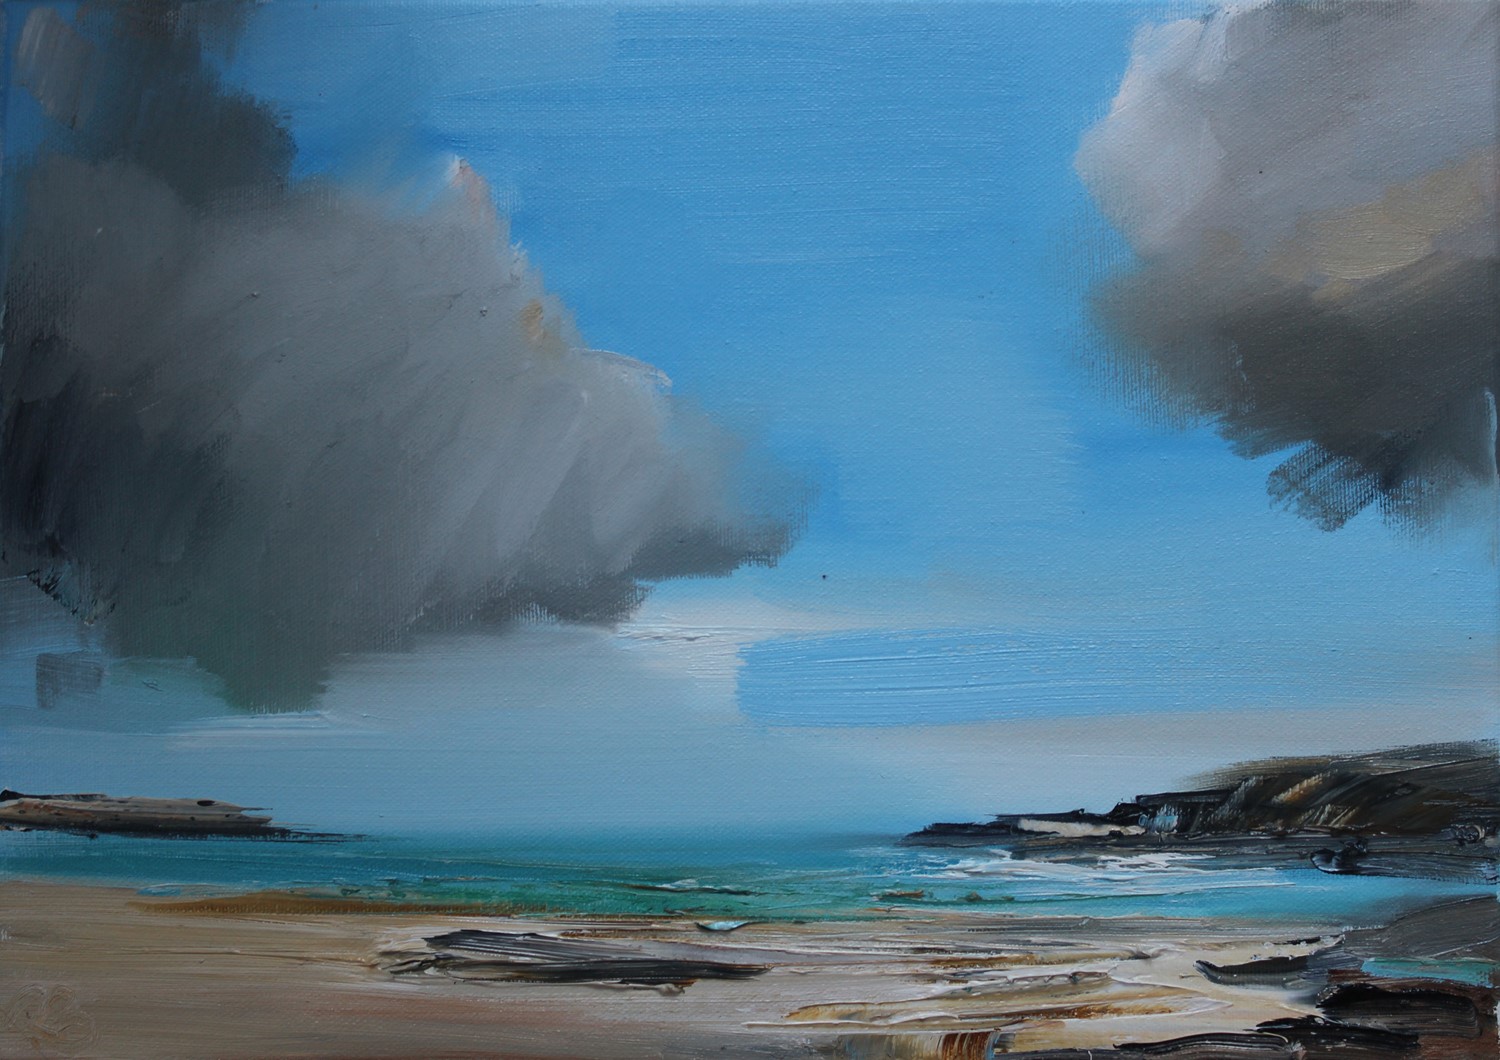 'Heavy Clouds Looming' by artist Rosanne Barr